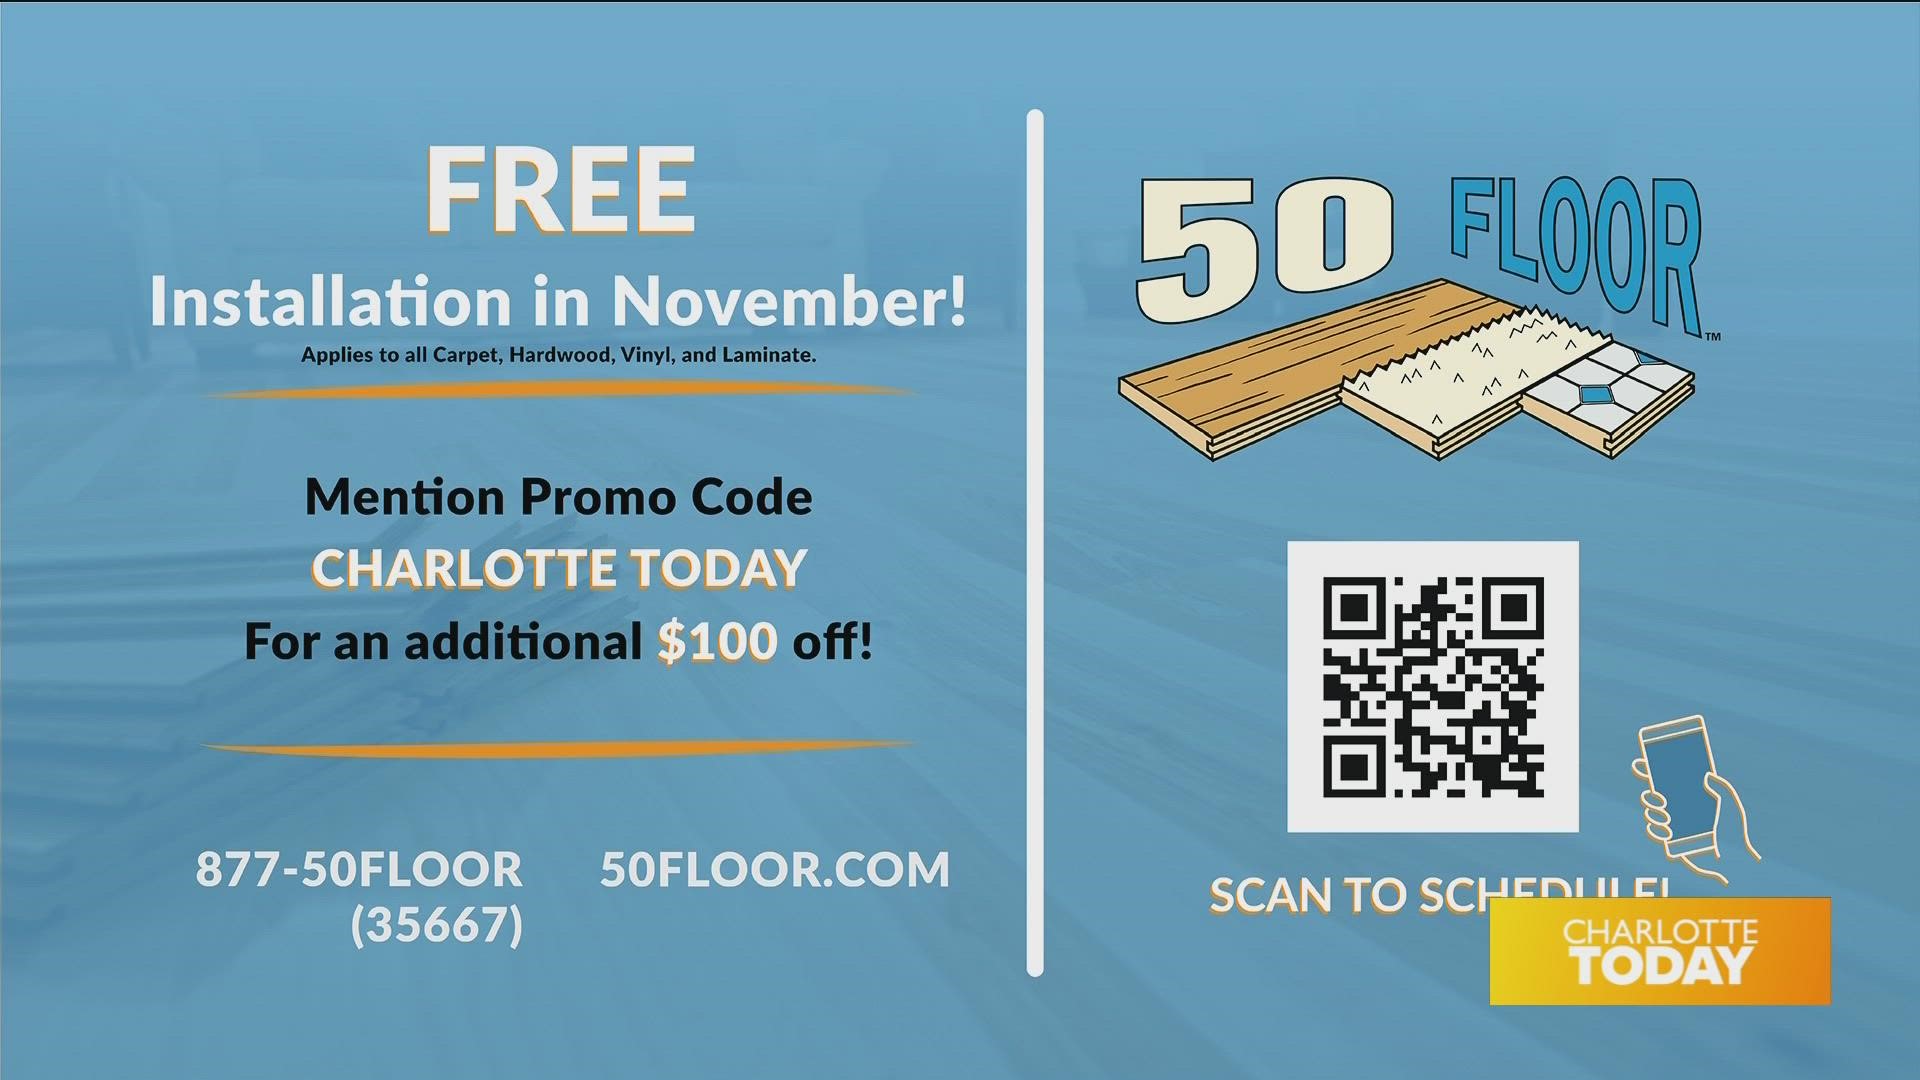 It's easy to get your floors done quickly with 50 Floor